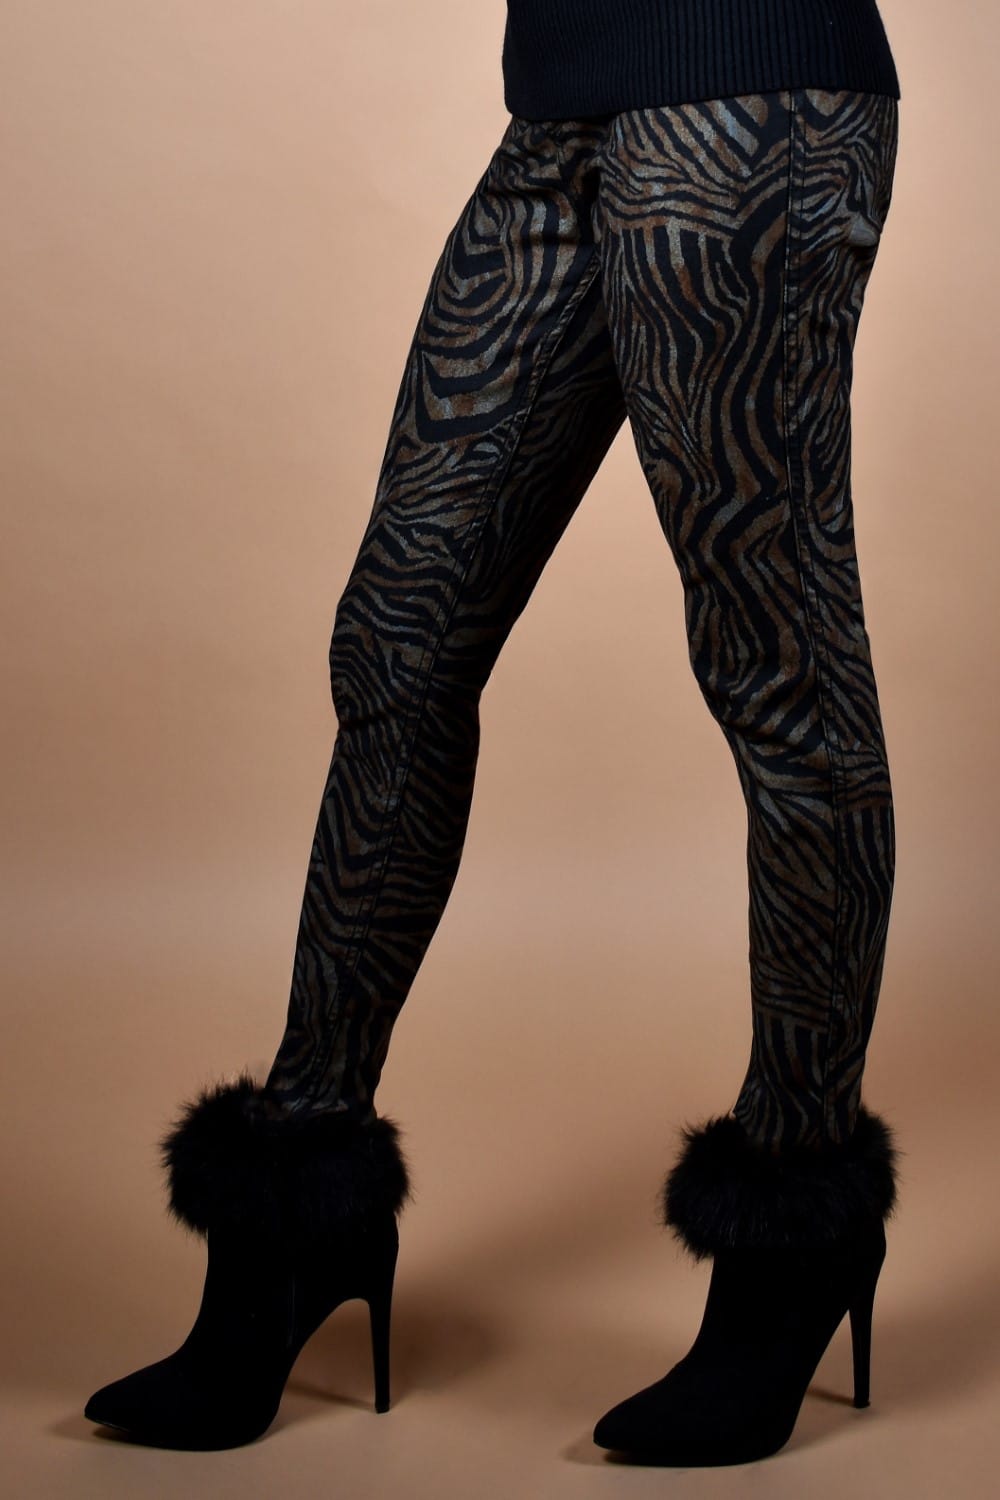 Frank Lyman Reversible Zebra Print Pant  So fierce! We can't get enough of these Zebra Print Pants from Frank Lyman! One side features a classic, solid black with faux front pockets. The other showcases a daring zebra print design, perfect for making a statement. Proudly designed in Canada.